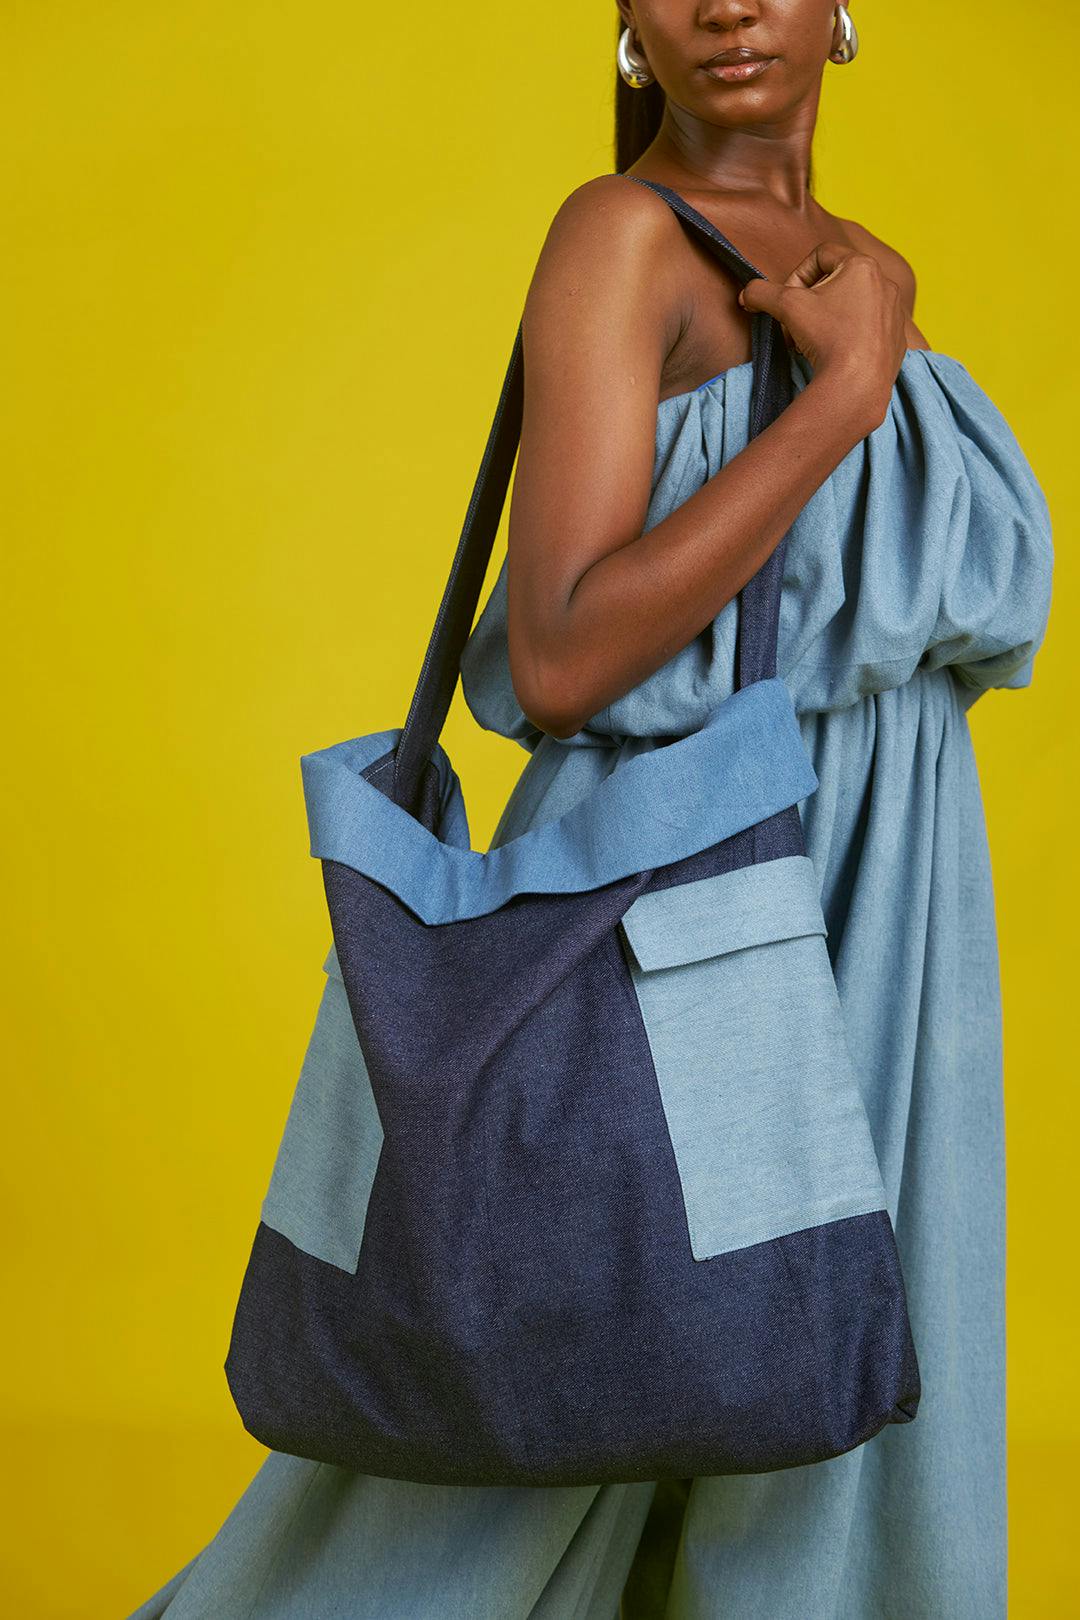 Denim tote bag, a product by M.O.T